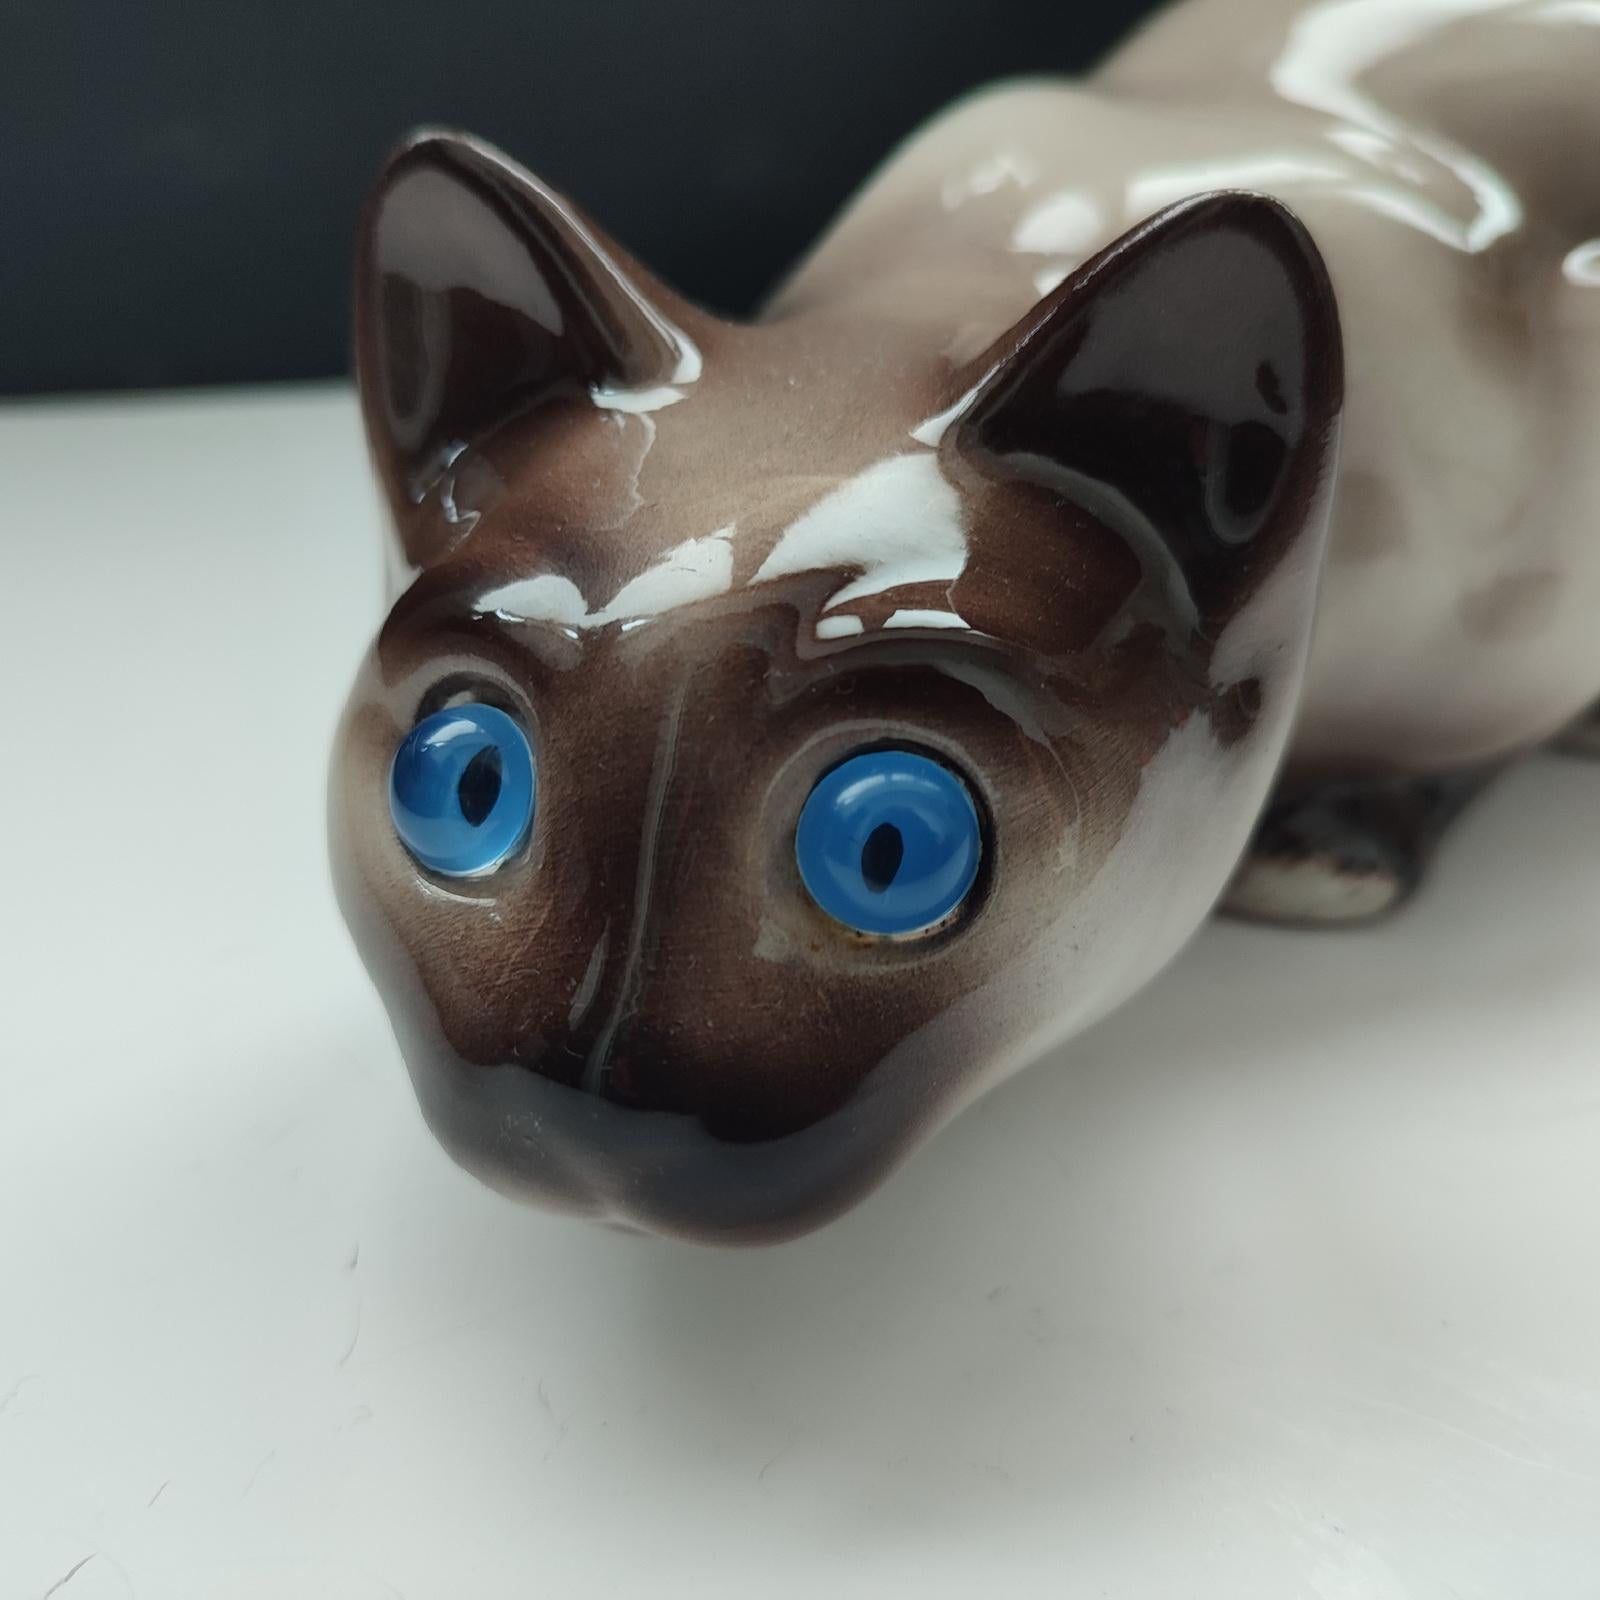 Large vintage ceramic Siamese Cat with blue glass eyes, realistic looking, ready to pounce. In excellent vintage condition with no chips or cracks. Maker's stamp on the bottom and label 'SIA' 
Dimensions: 36 cm [14.5 inch] long x 14 cm [5.5 inch]